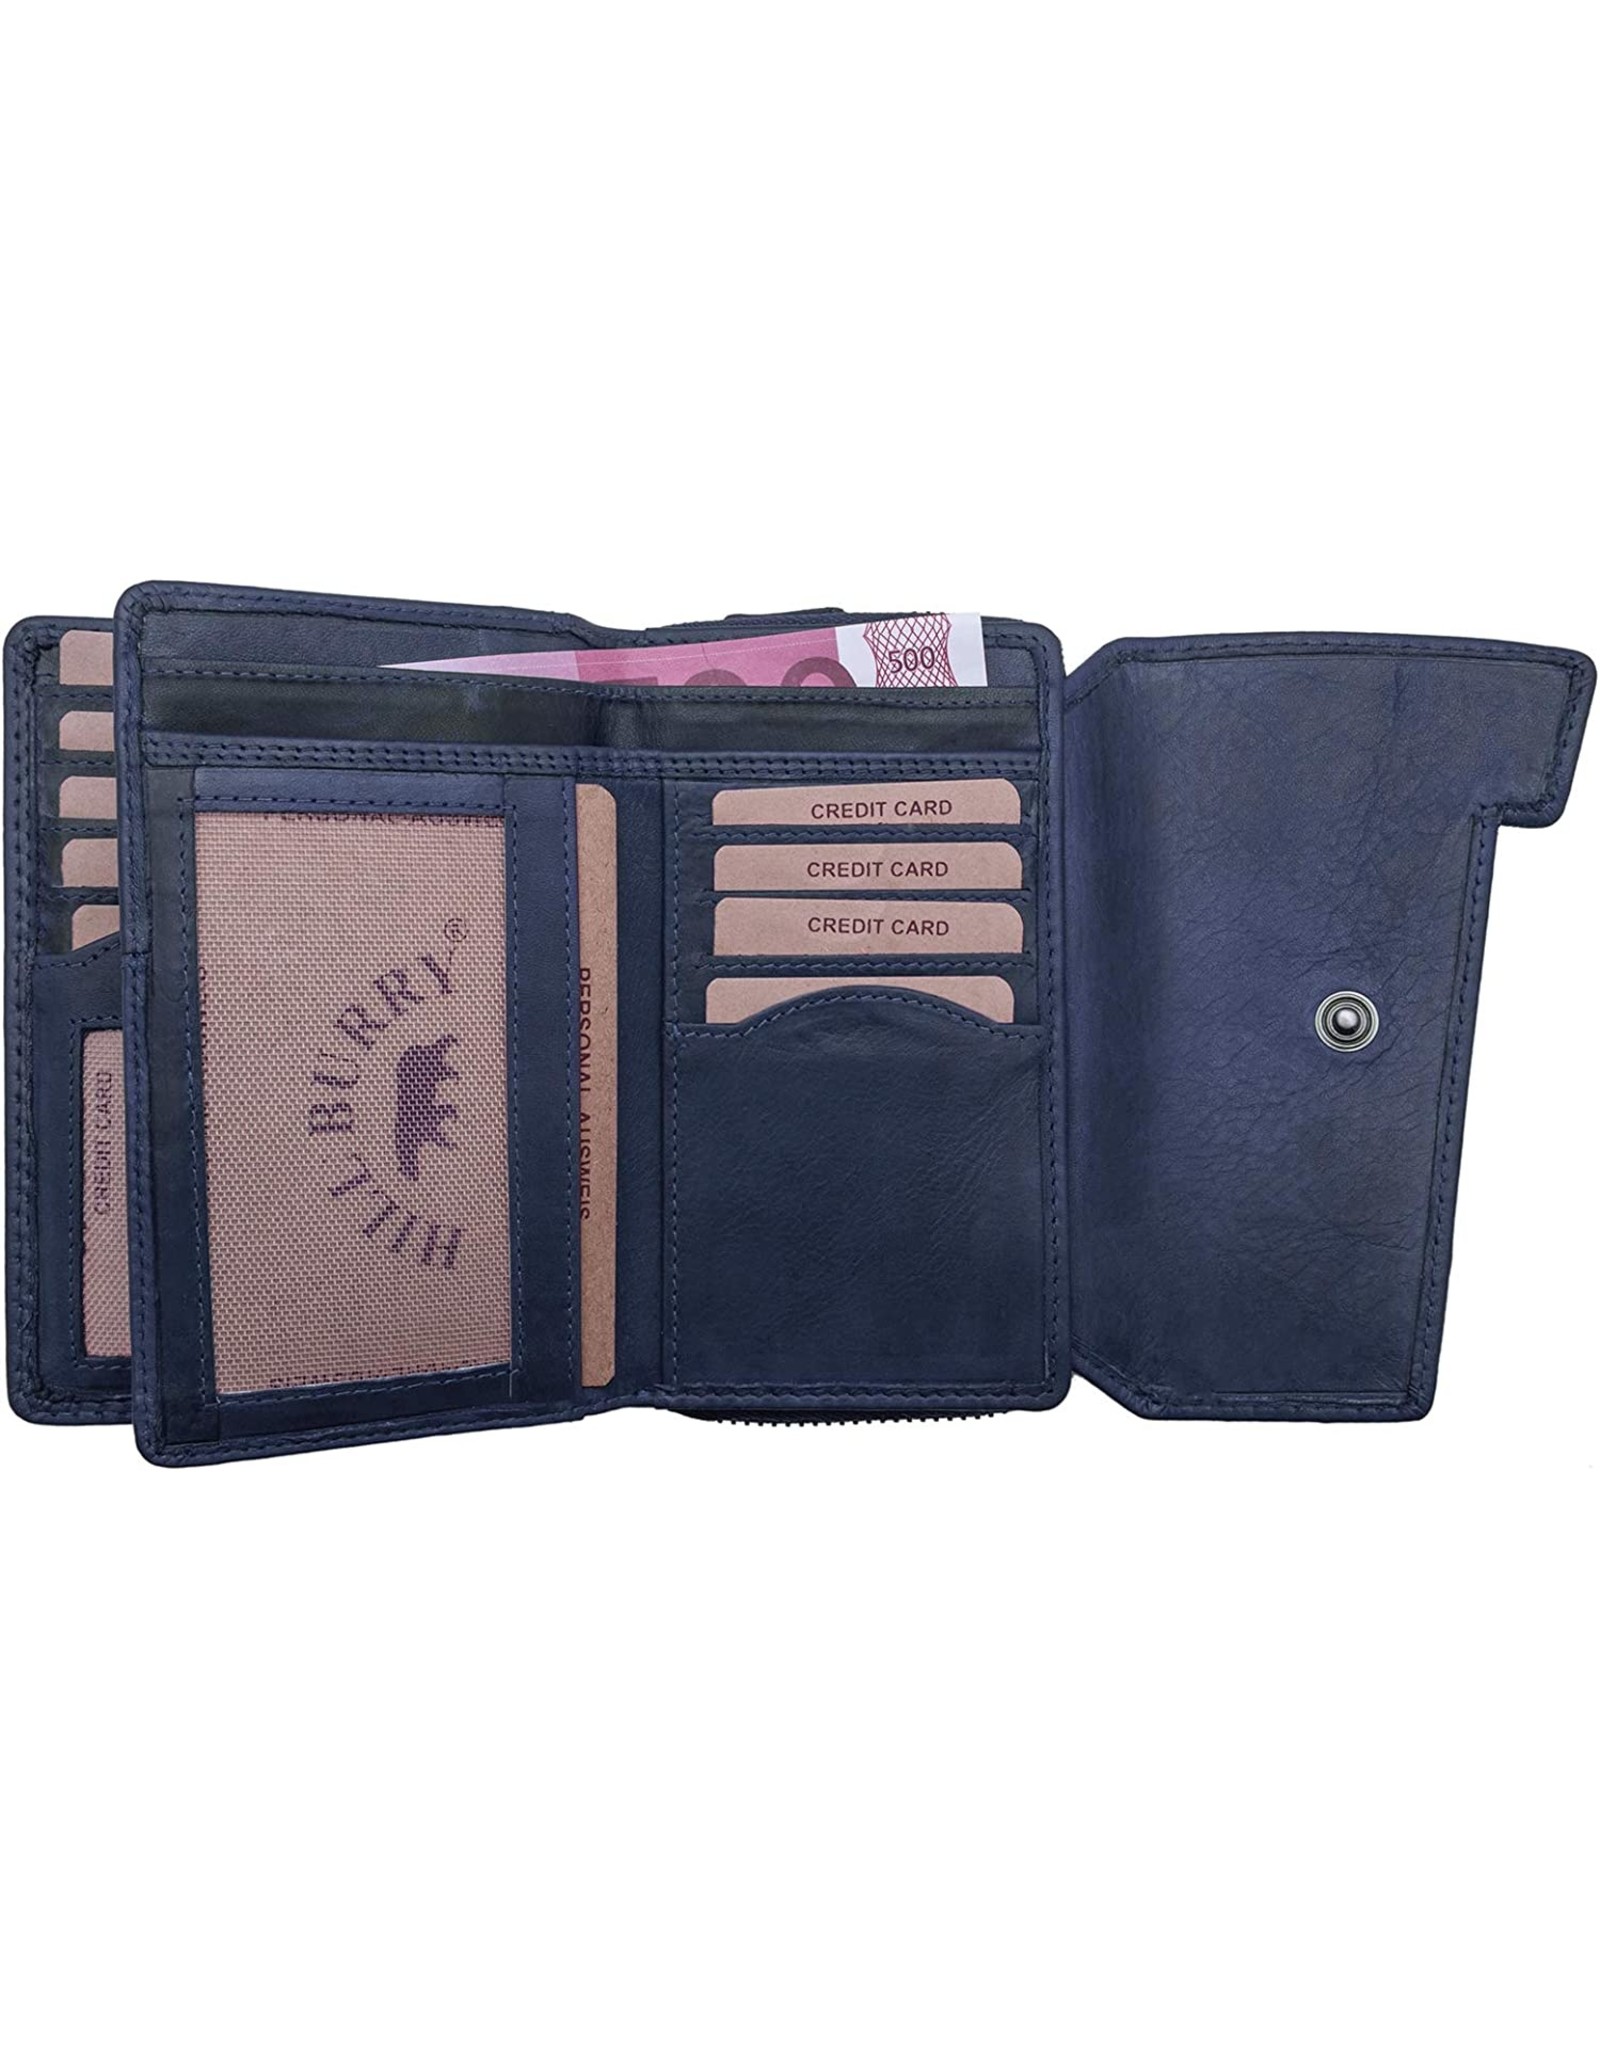 HillBurry Leather wallets - Hillburry leather wallet  with RFID